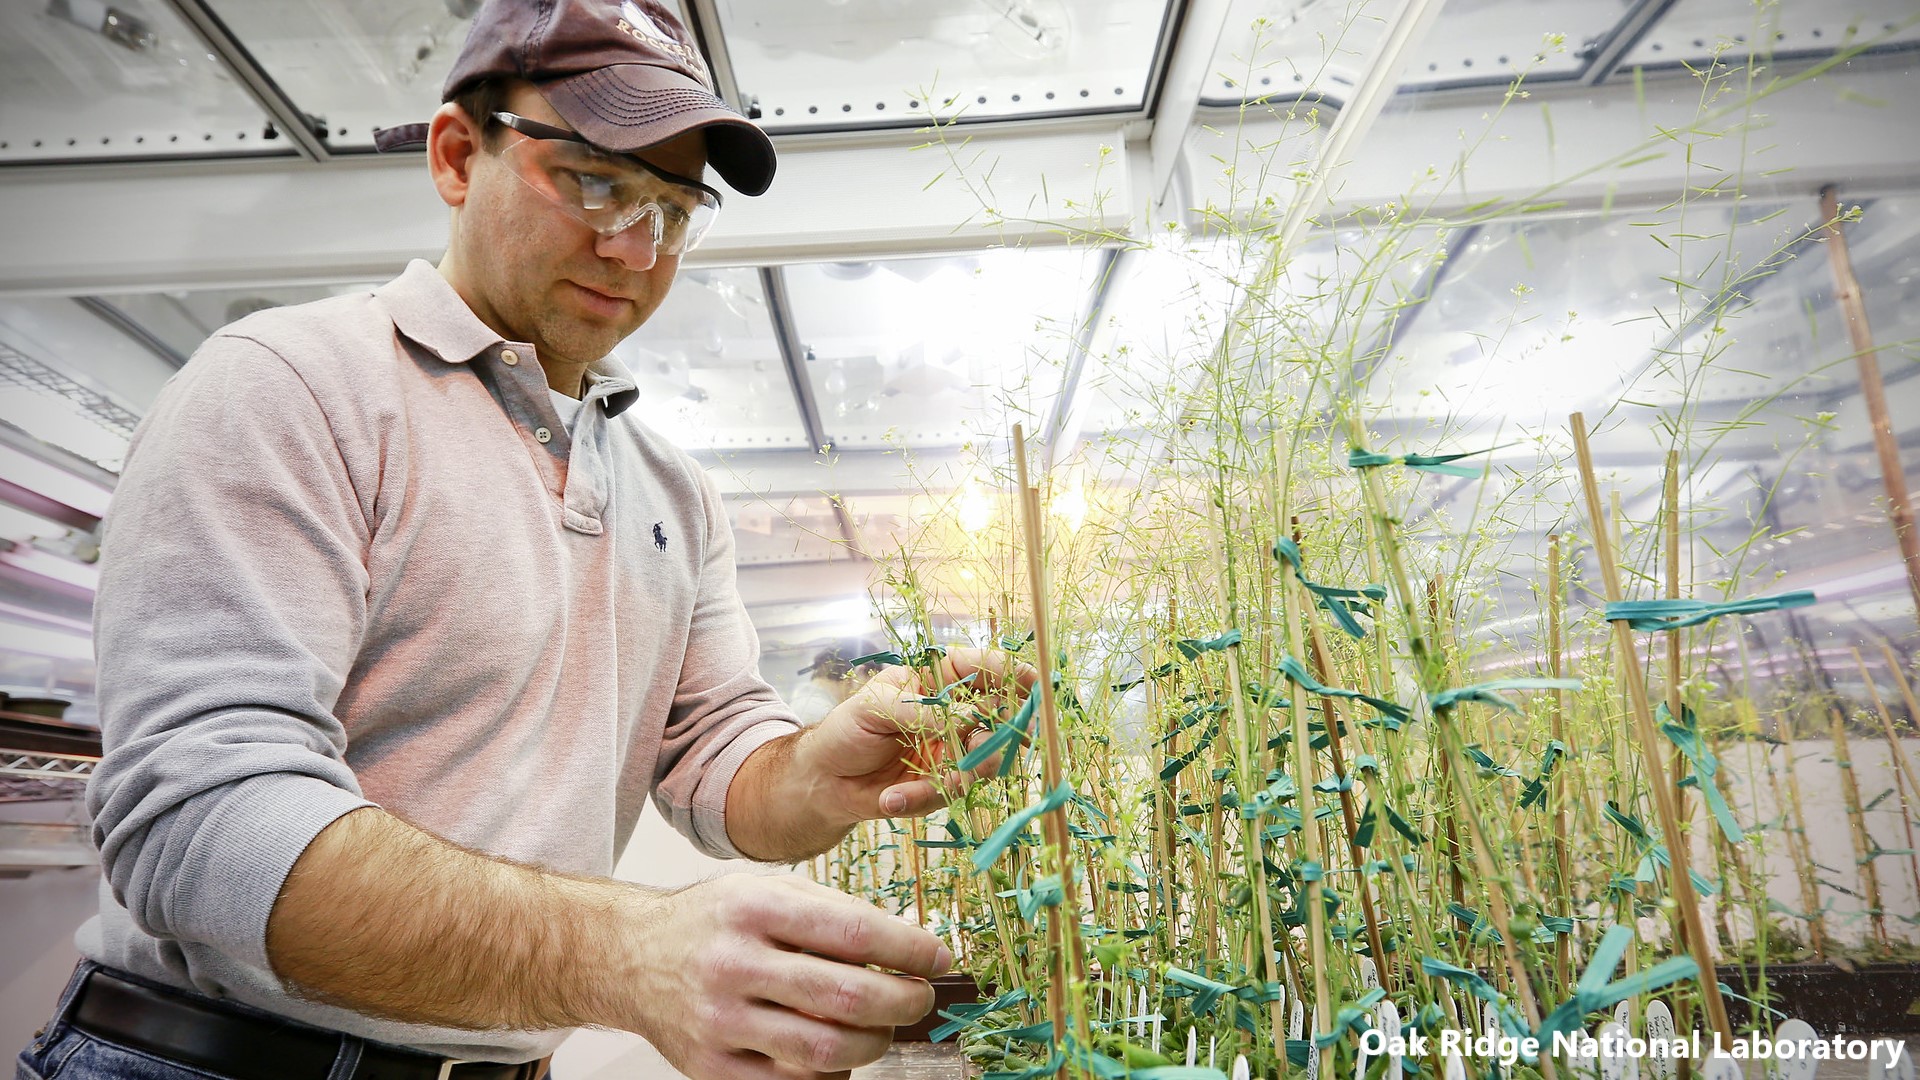 Bioenergy research. In the BioEnergy Science Center of the Oak Ridge National Laboratory, postdoctoral researcher Anthony Bryan examines a tray of Arabidopsis.